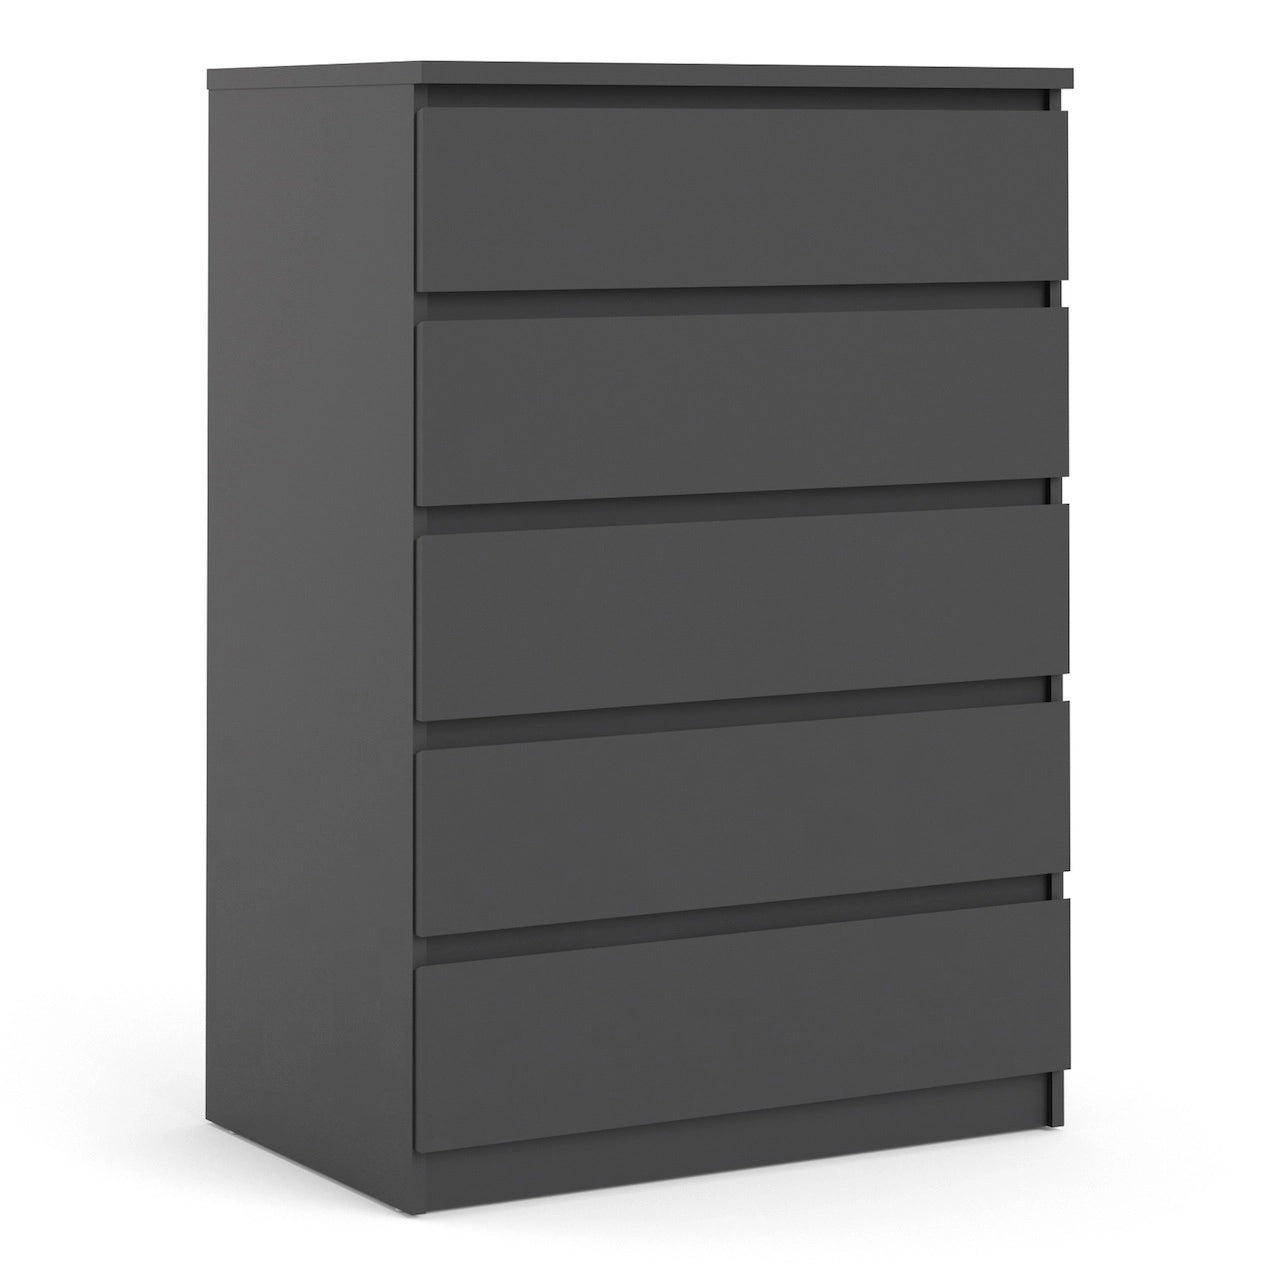 Furniture To Go Naia Chest of 5 Drawers in Black Matt